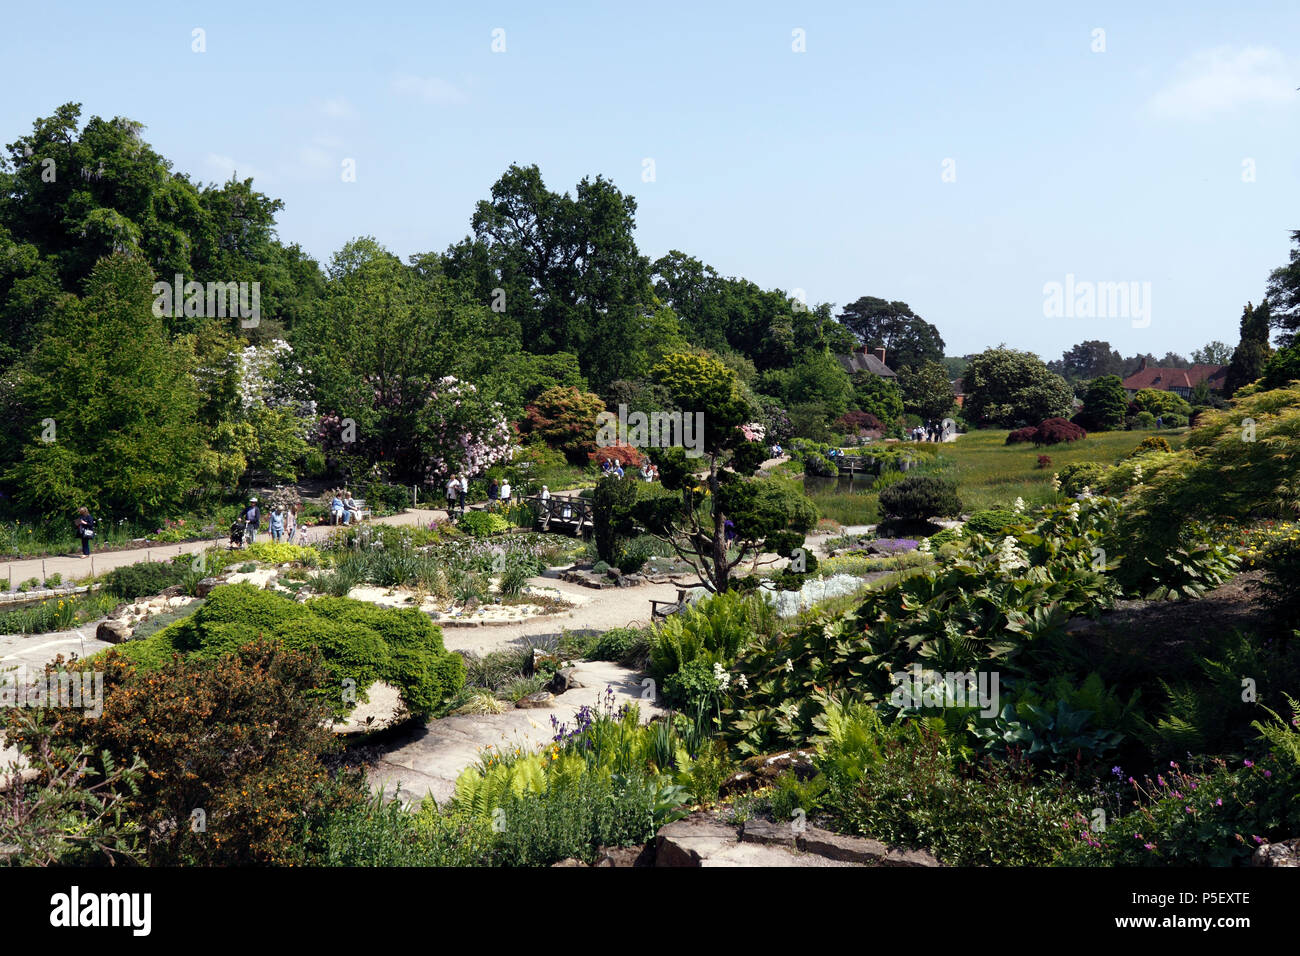 RHS WISLEY FROM THE ROCK GARDEN. EARLY SUMMER. Stock Photo